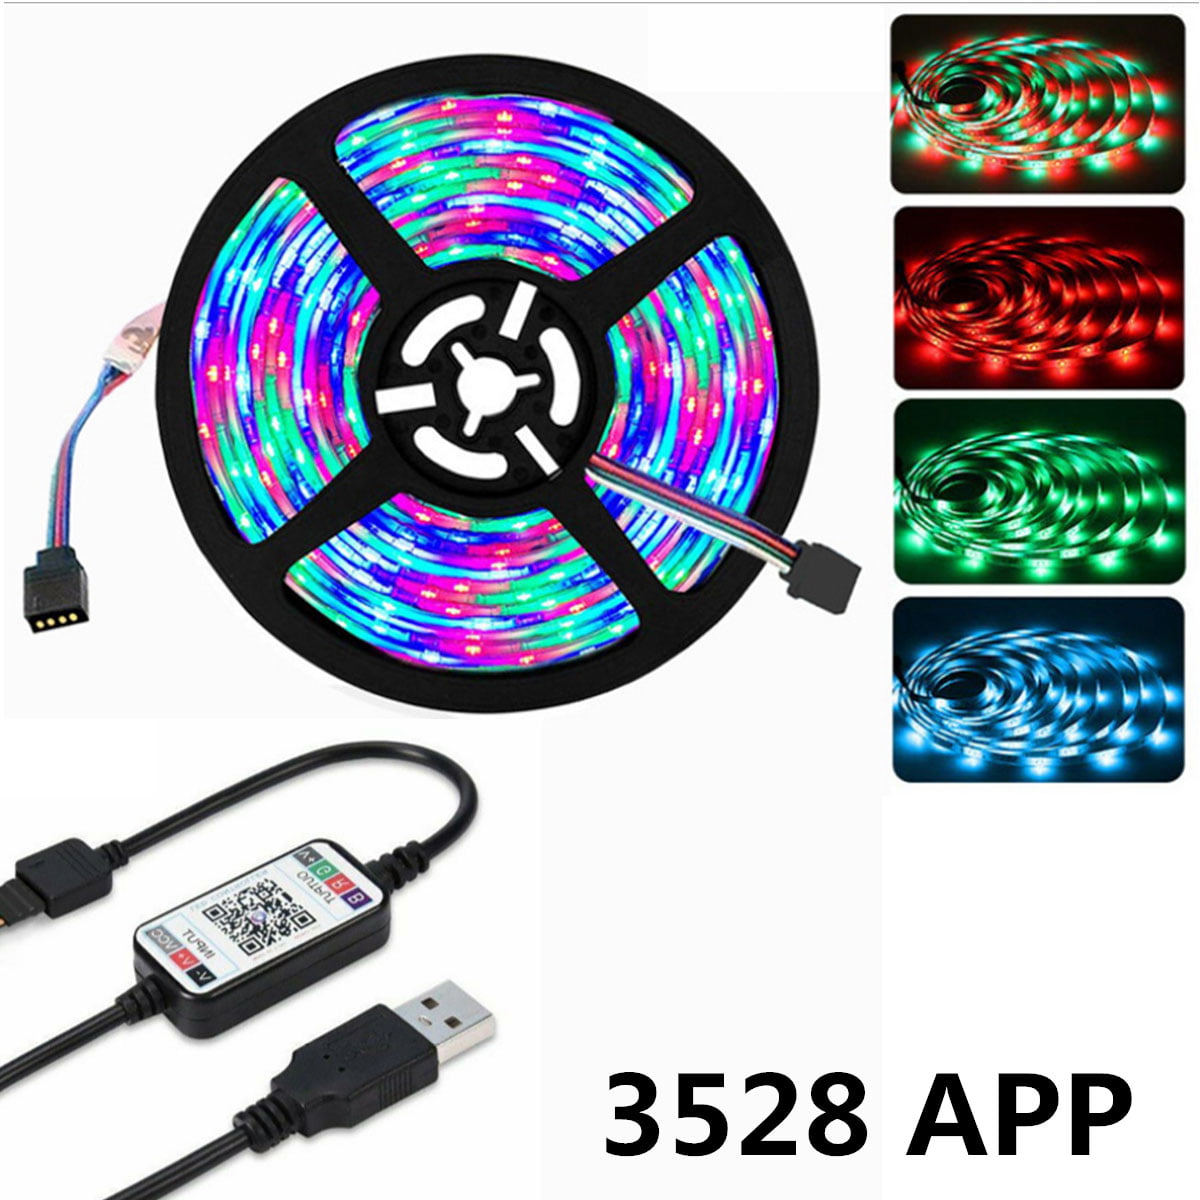 Details about   3528/5050 RGB LED flexible strip kit+Bluetooth/music/remote control+power supply 